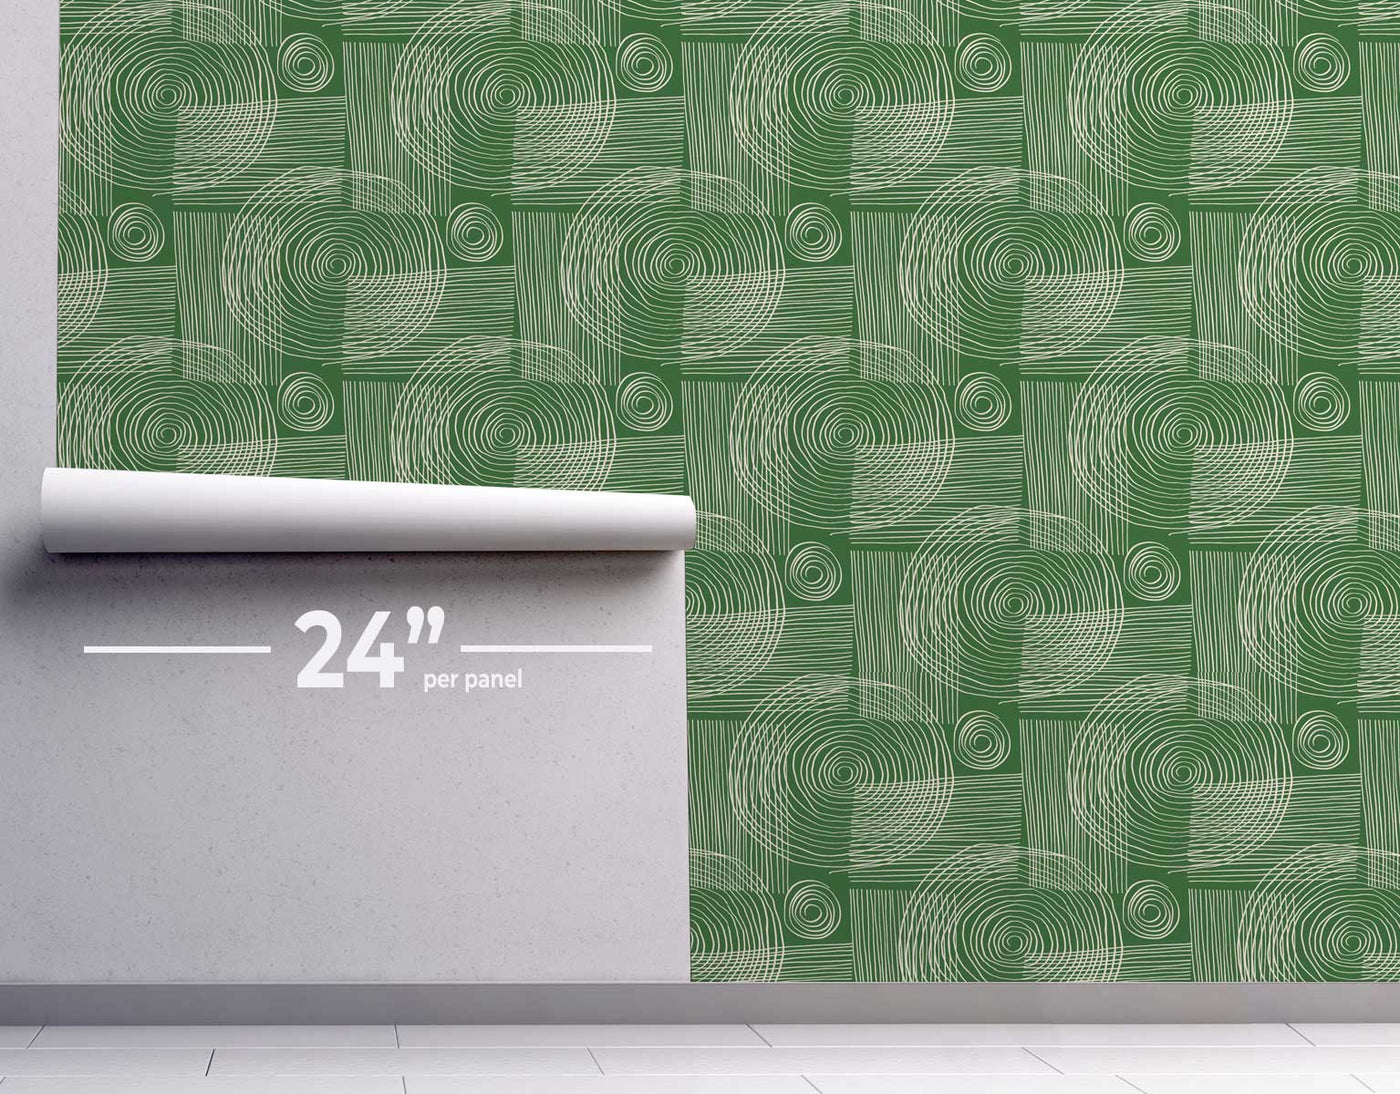 Green Line Abstract Wallpaper #399-Repeat Pattern Wallpaper-Eazywallz